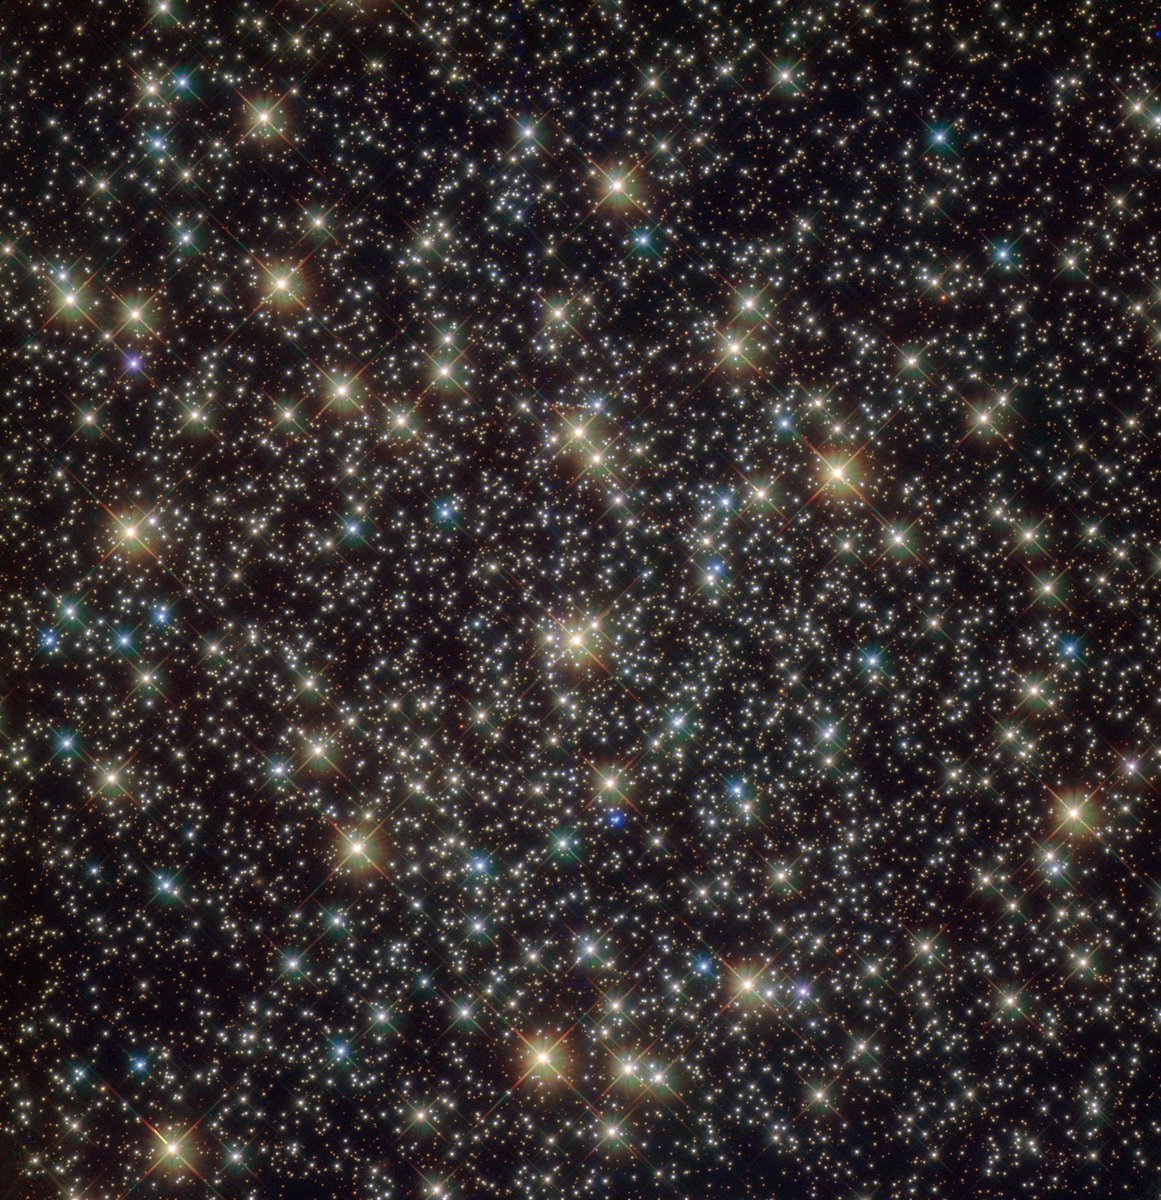 6/ And yet for all the mind blowing phenomenology of stars, I think they missed the mark when it came to emergent complexity. There is something more complex in space than stars... (Image: ESA, Hubble, NASA, Sarajedini et al.)